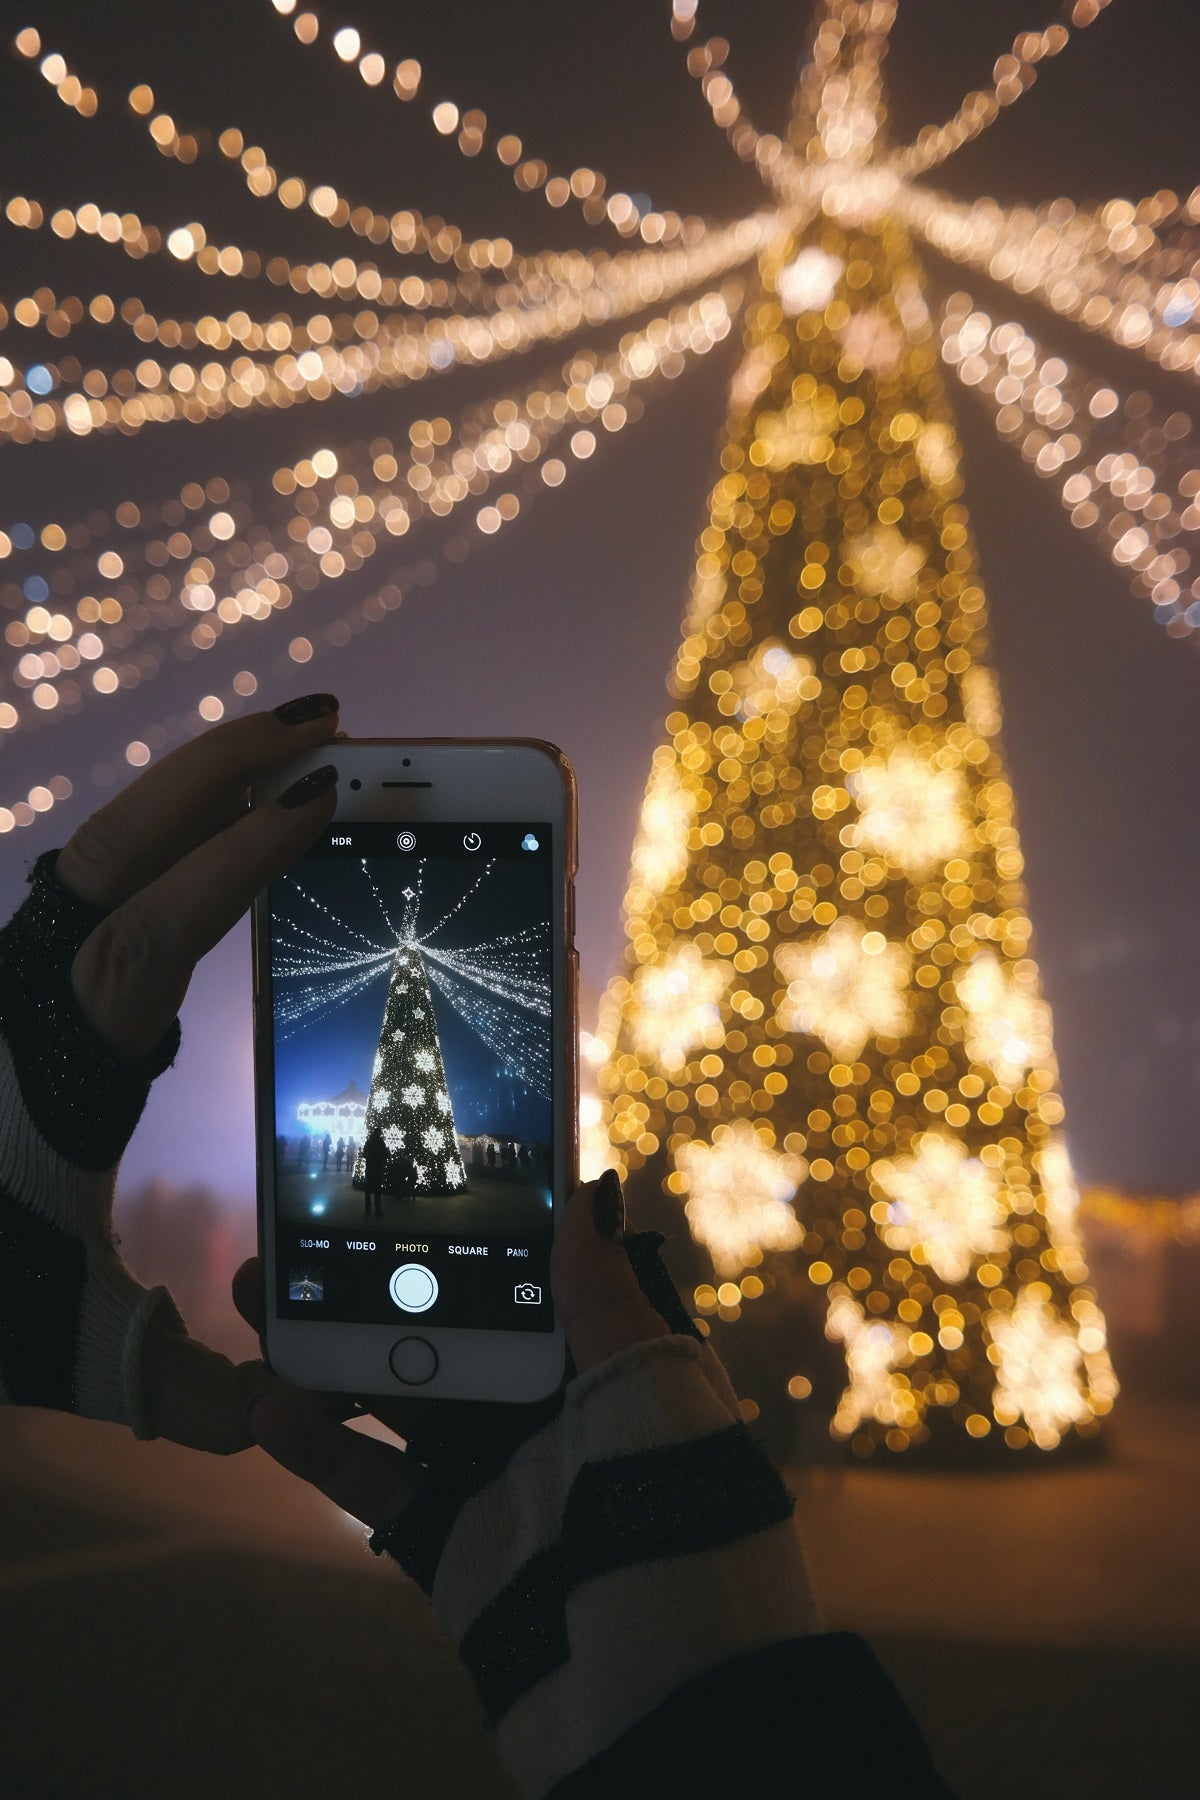 Someone taking a photo of a glowing Christmas tree with their phone